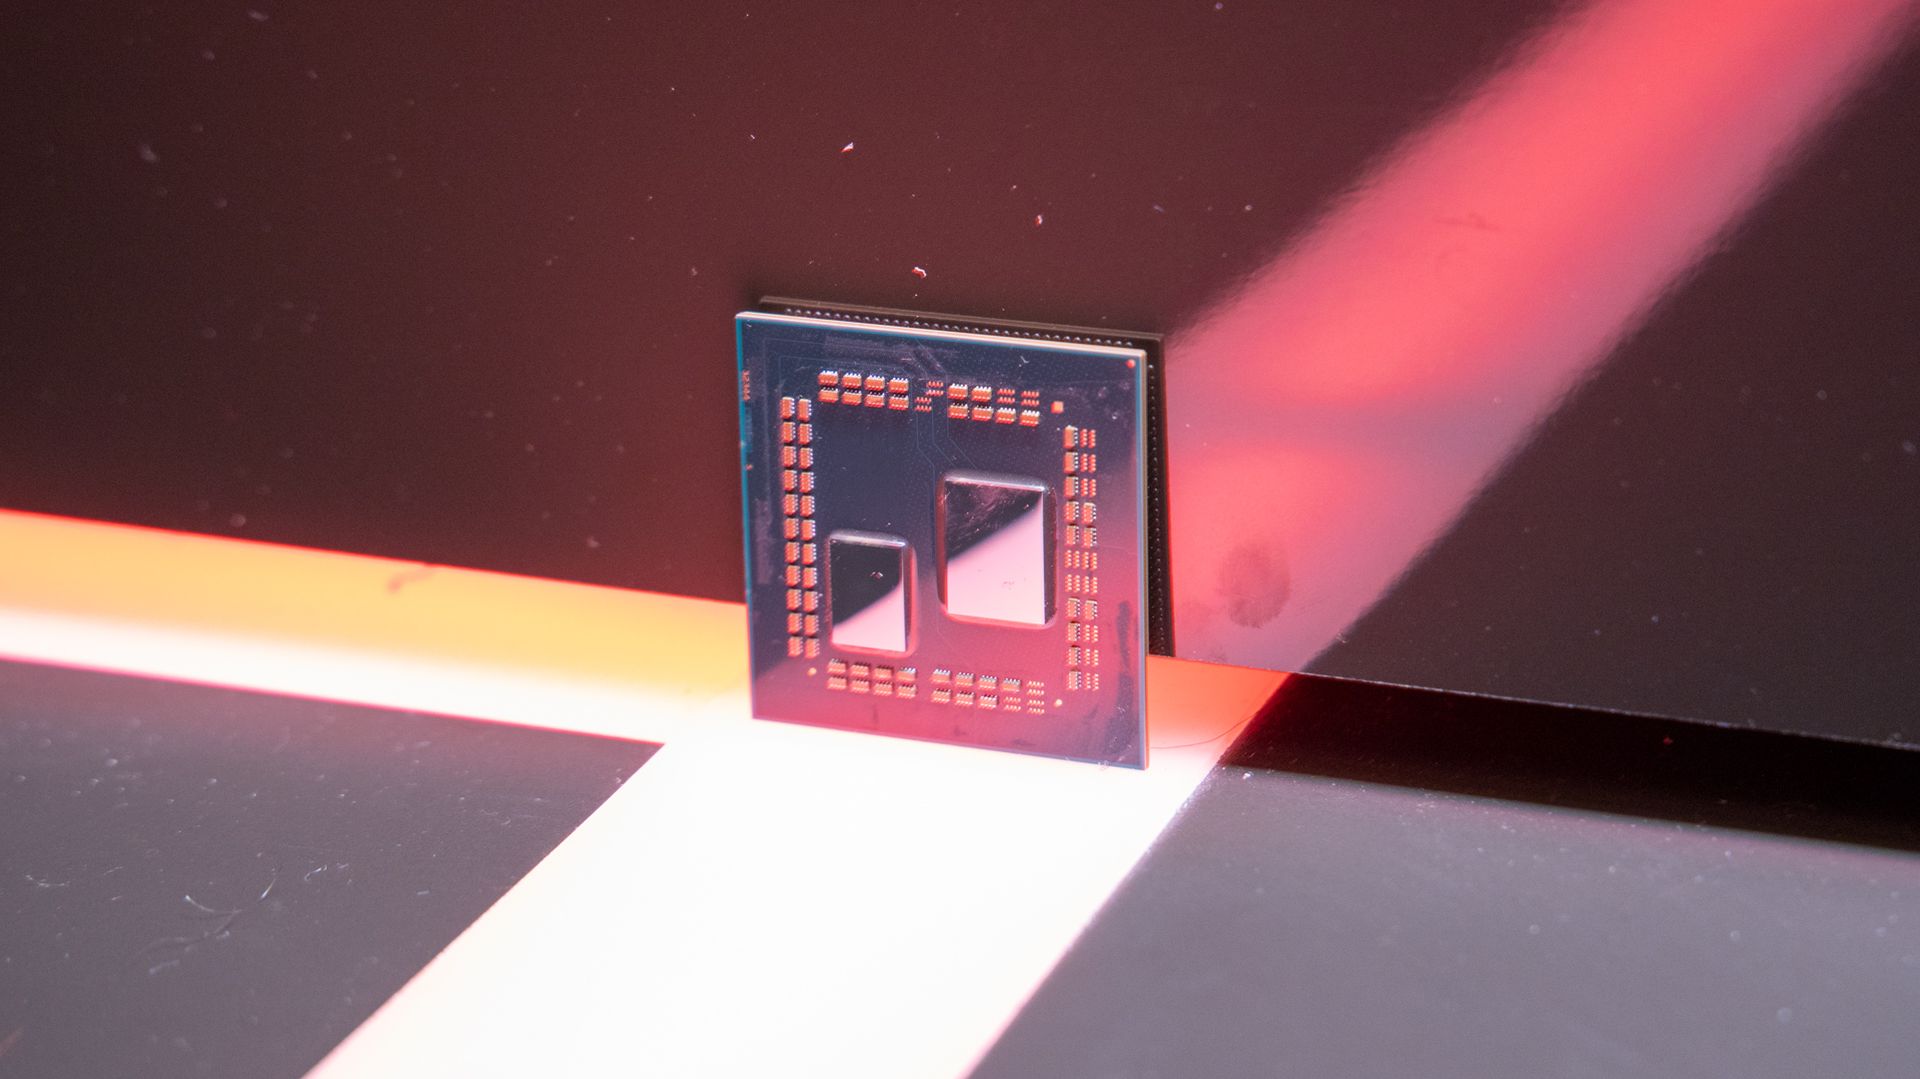 amd-ryzen-3000-processors-may-come-with-up-to-16-cores-inside-techradar